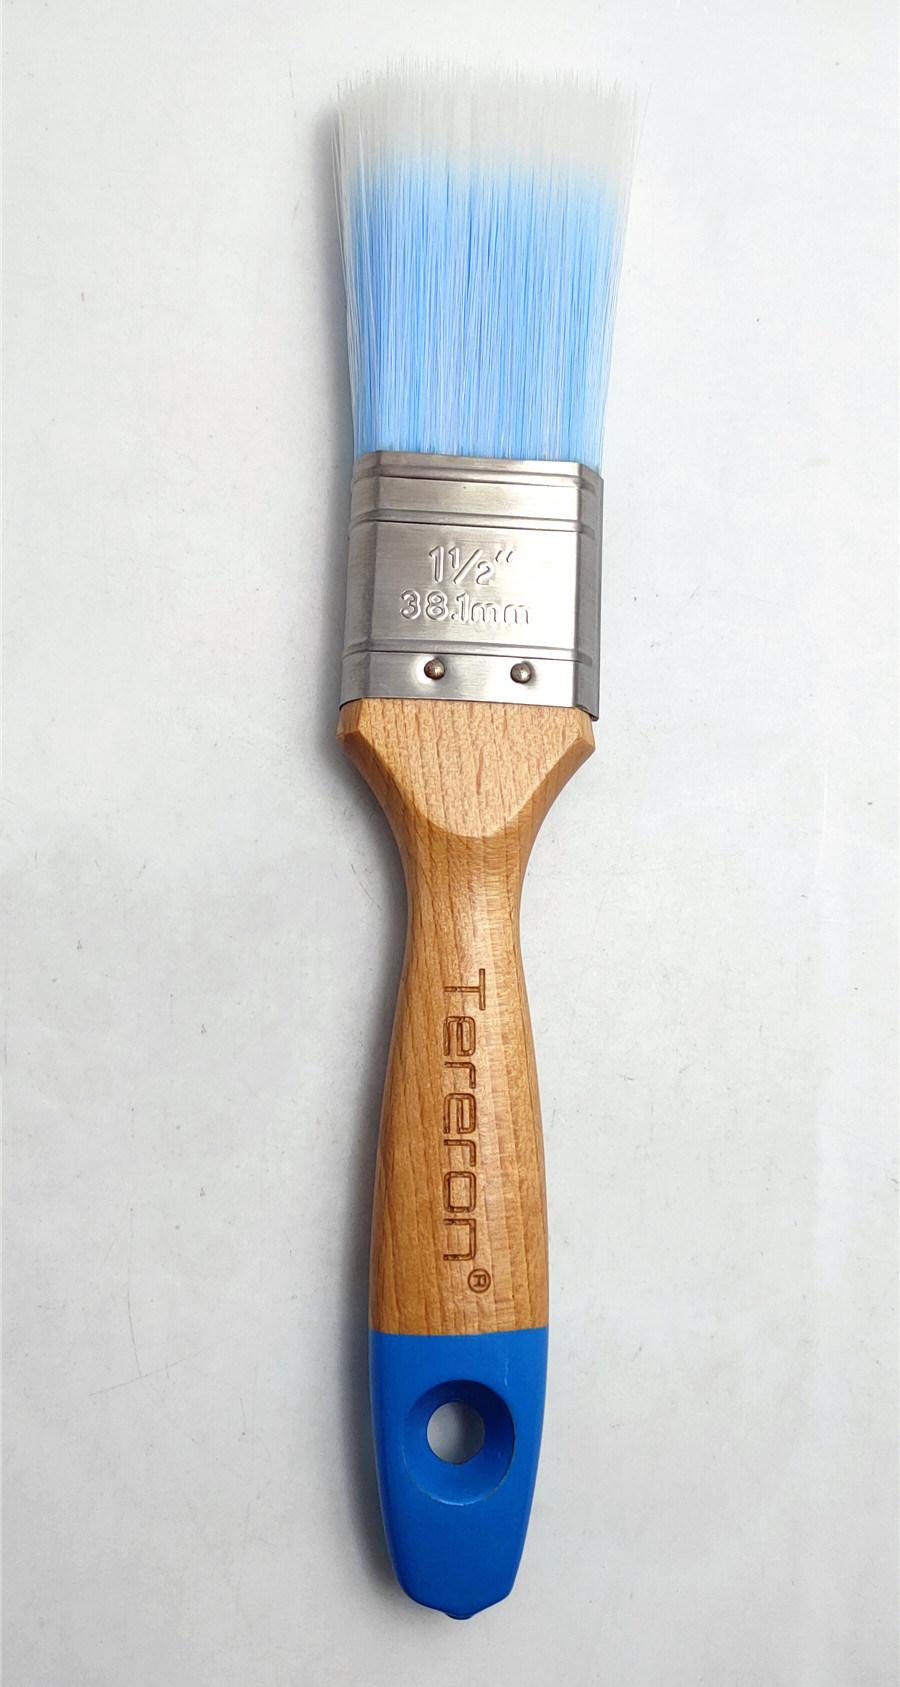 Machine Decor Tool Texture Pattern Wall Painting Paint Roller Brush